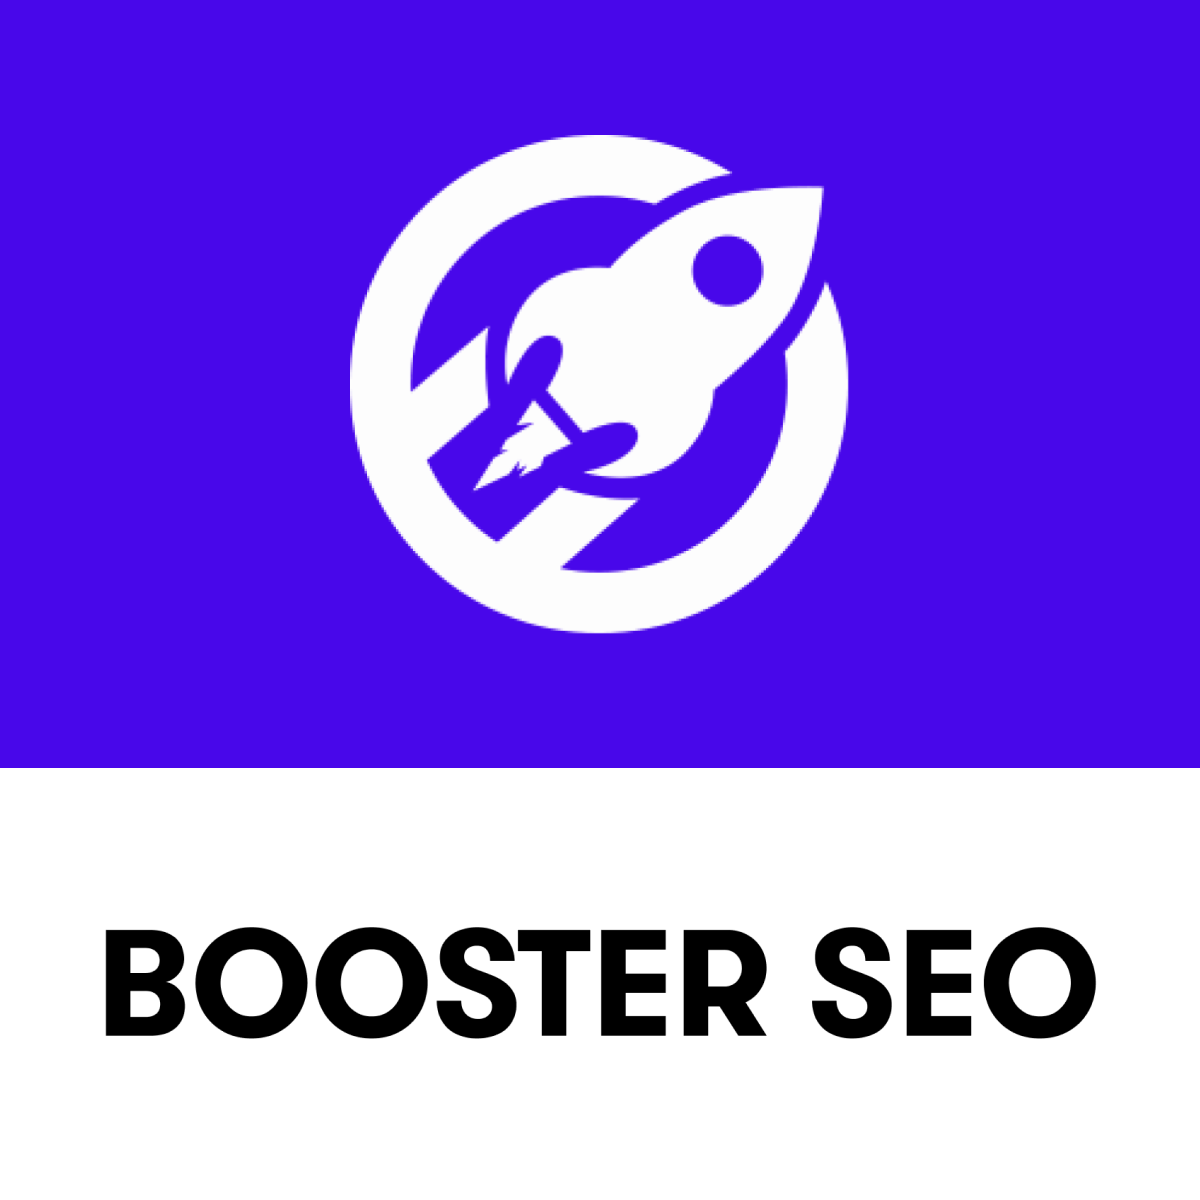 Booster SEO